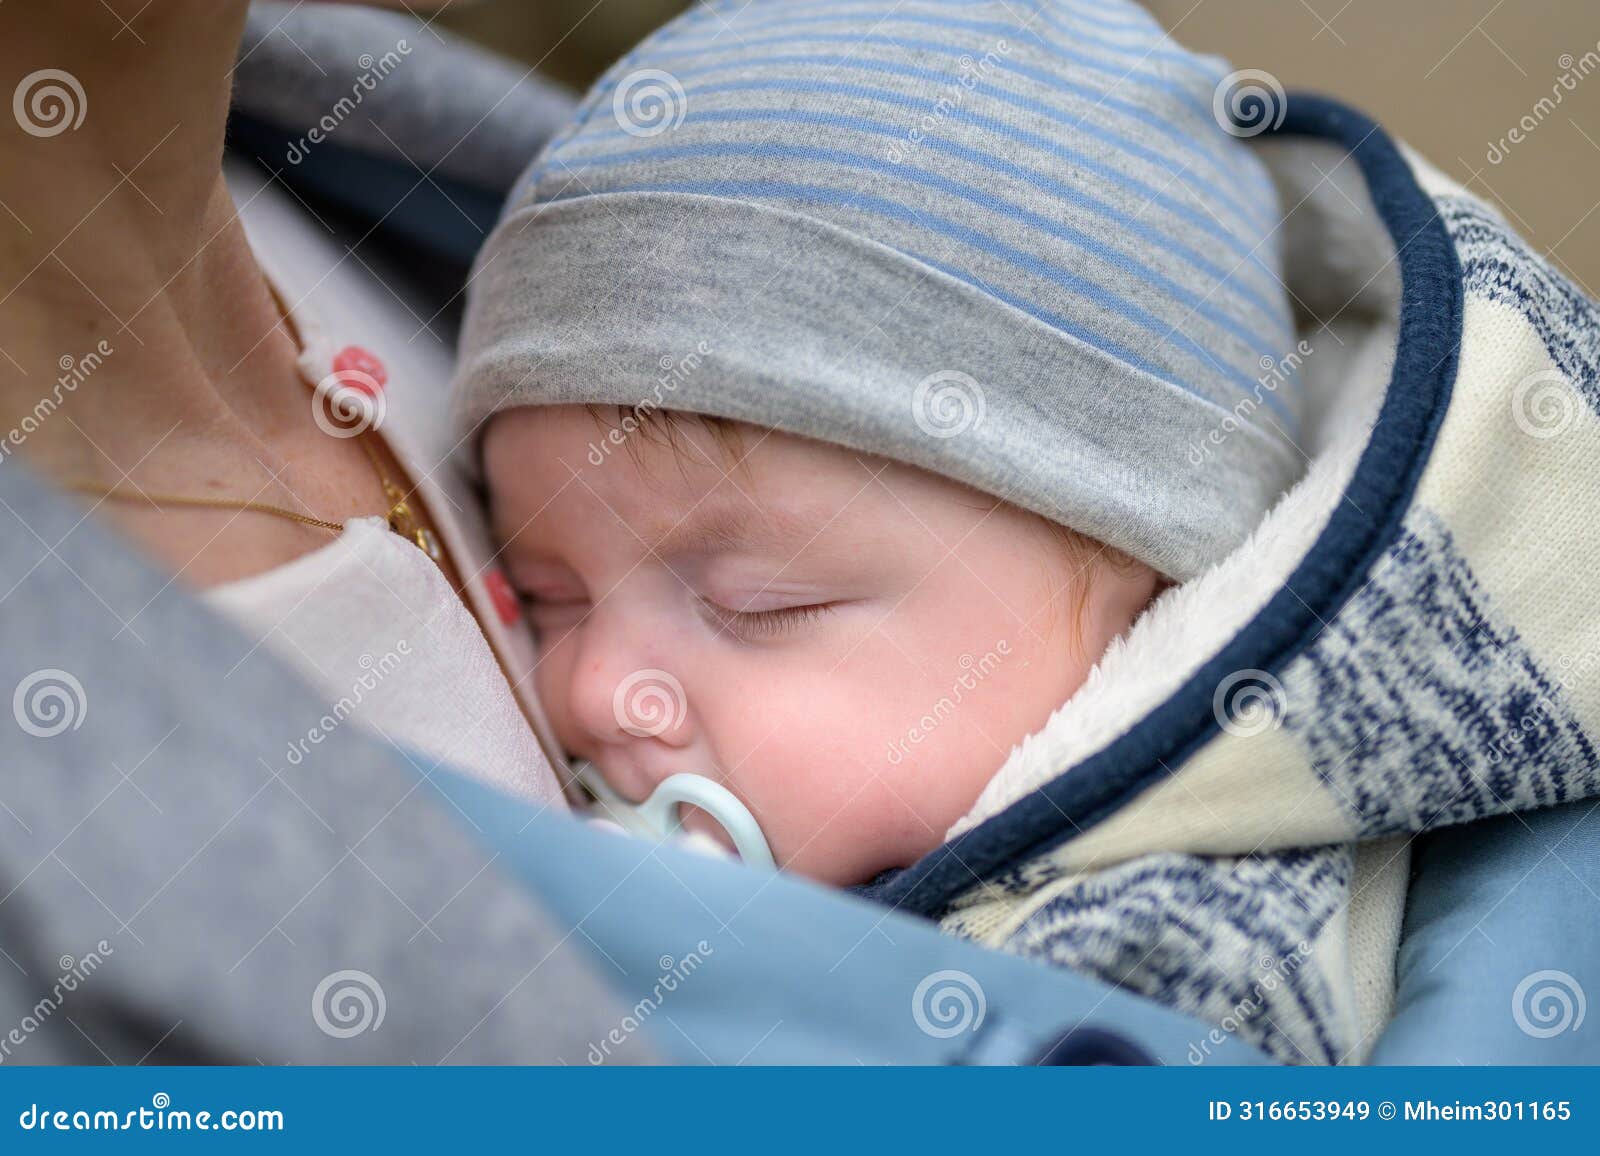 extreme close up of a baby sleeping in a baby carrier, in an extraordinary closeness to his mother